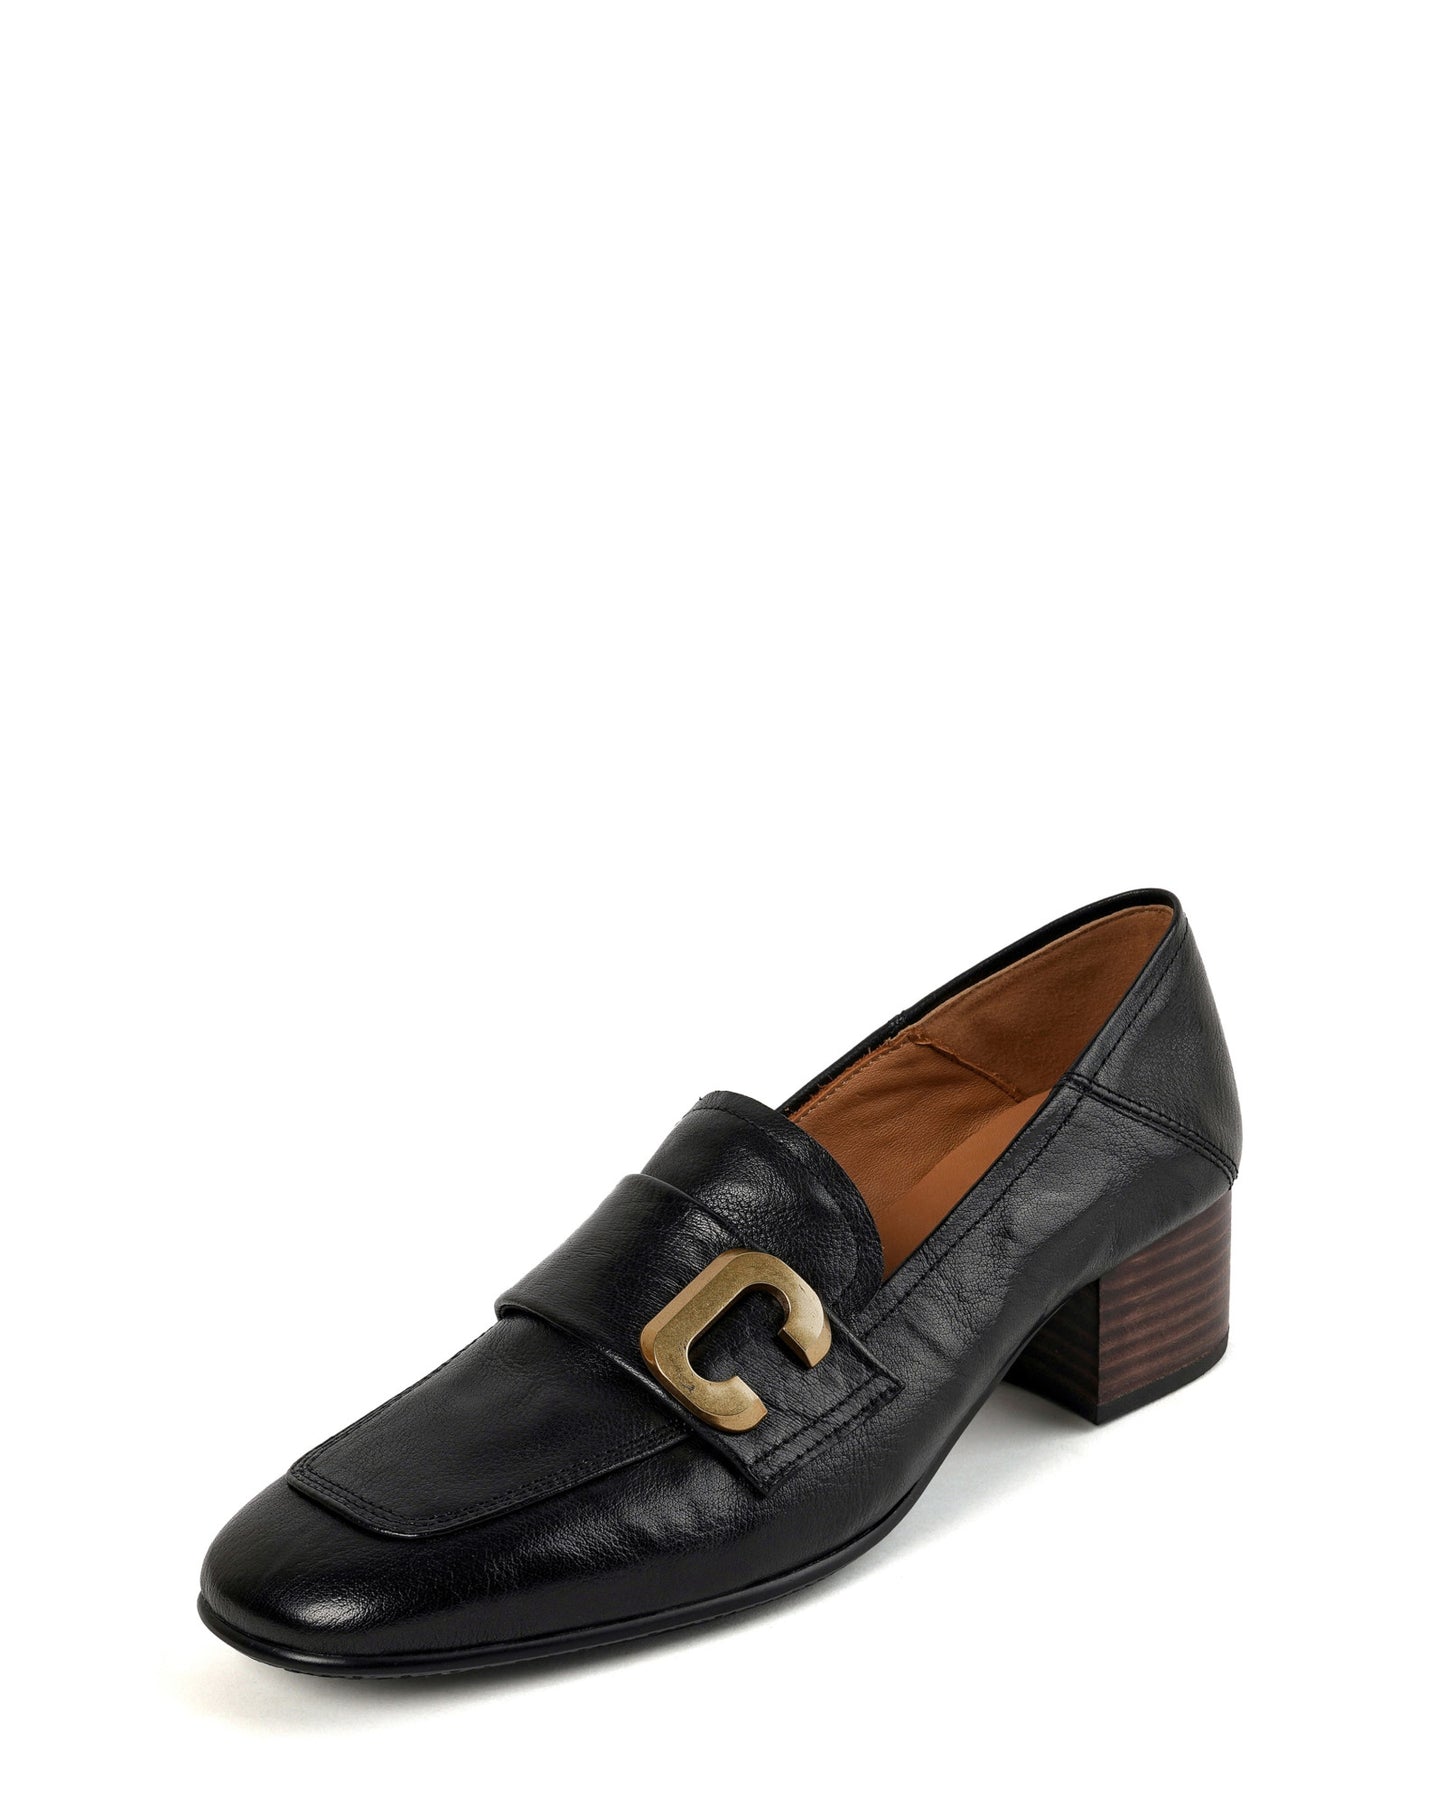 415-c-buckled-leather-loafers-black